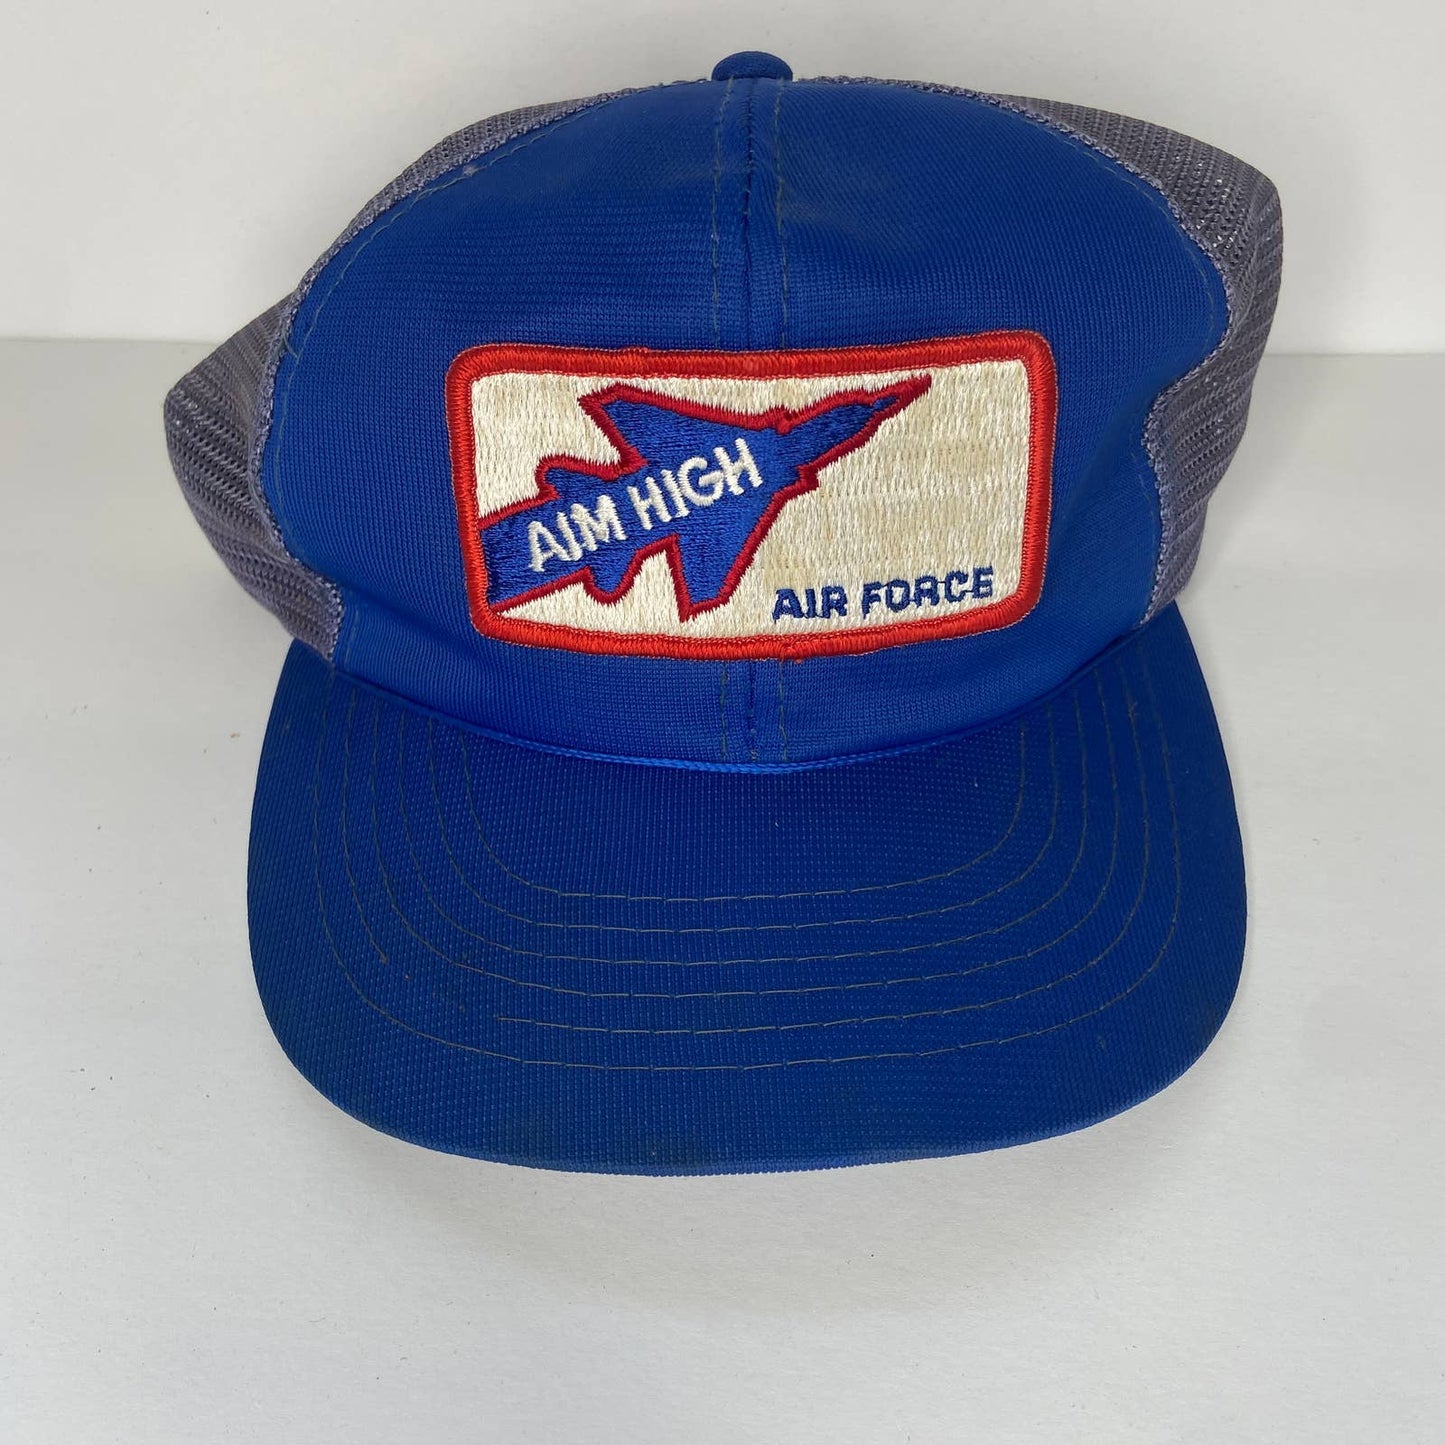 Vintage Air Force Aim High Mesh Embroidered Snapback Trucker Hat